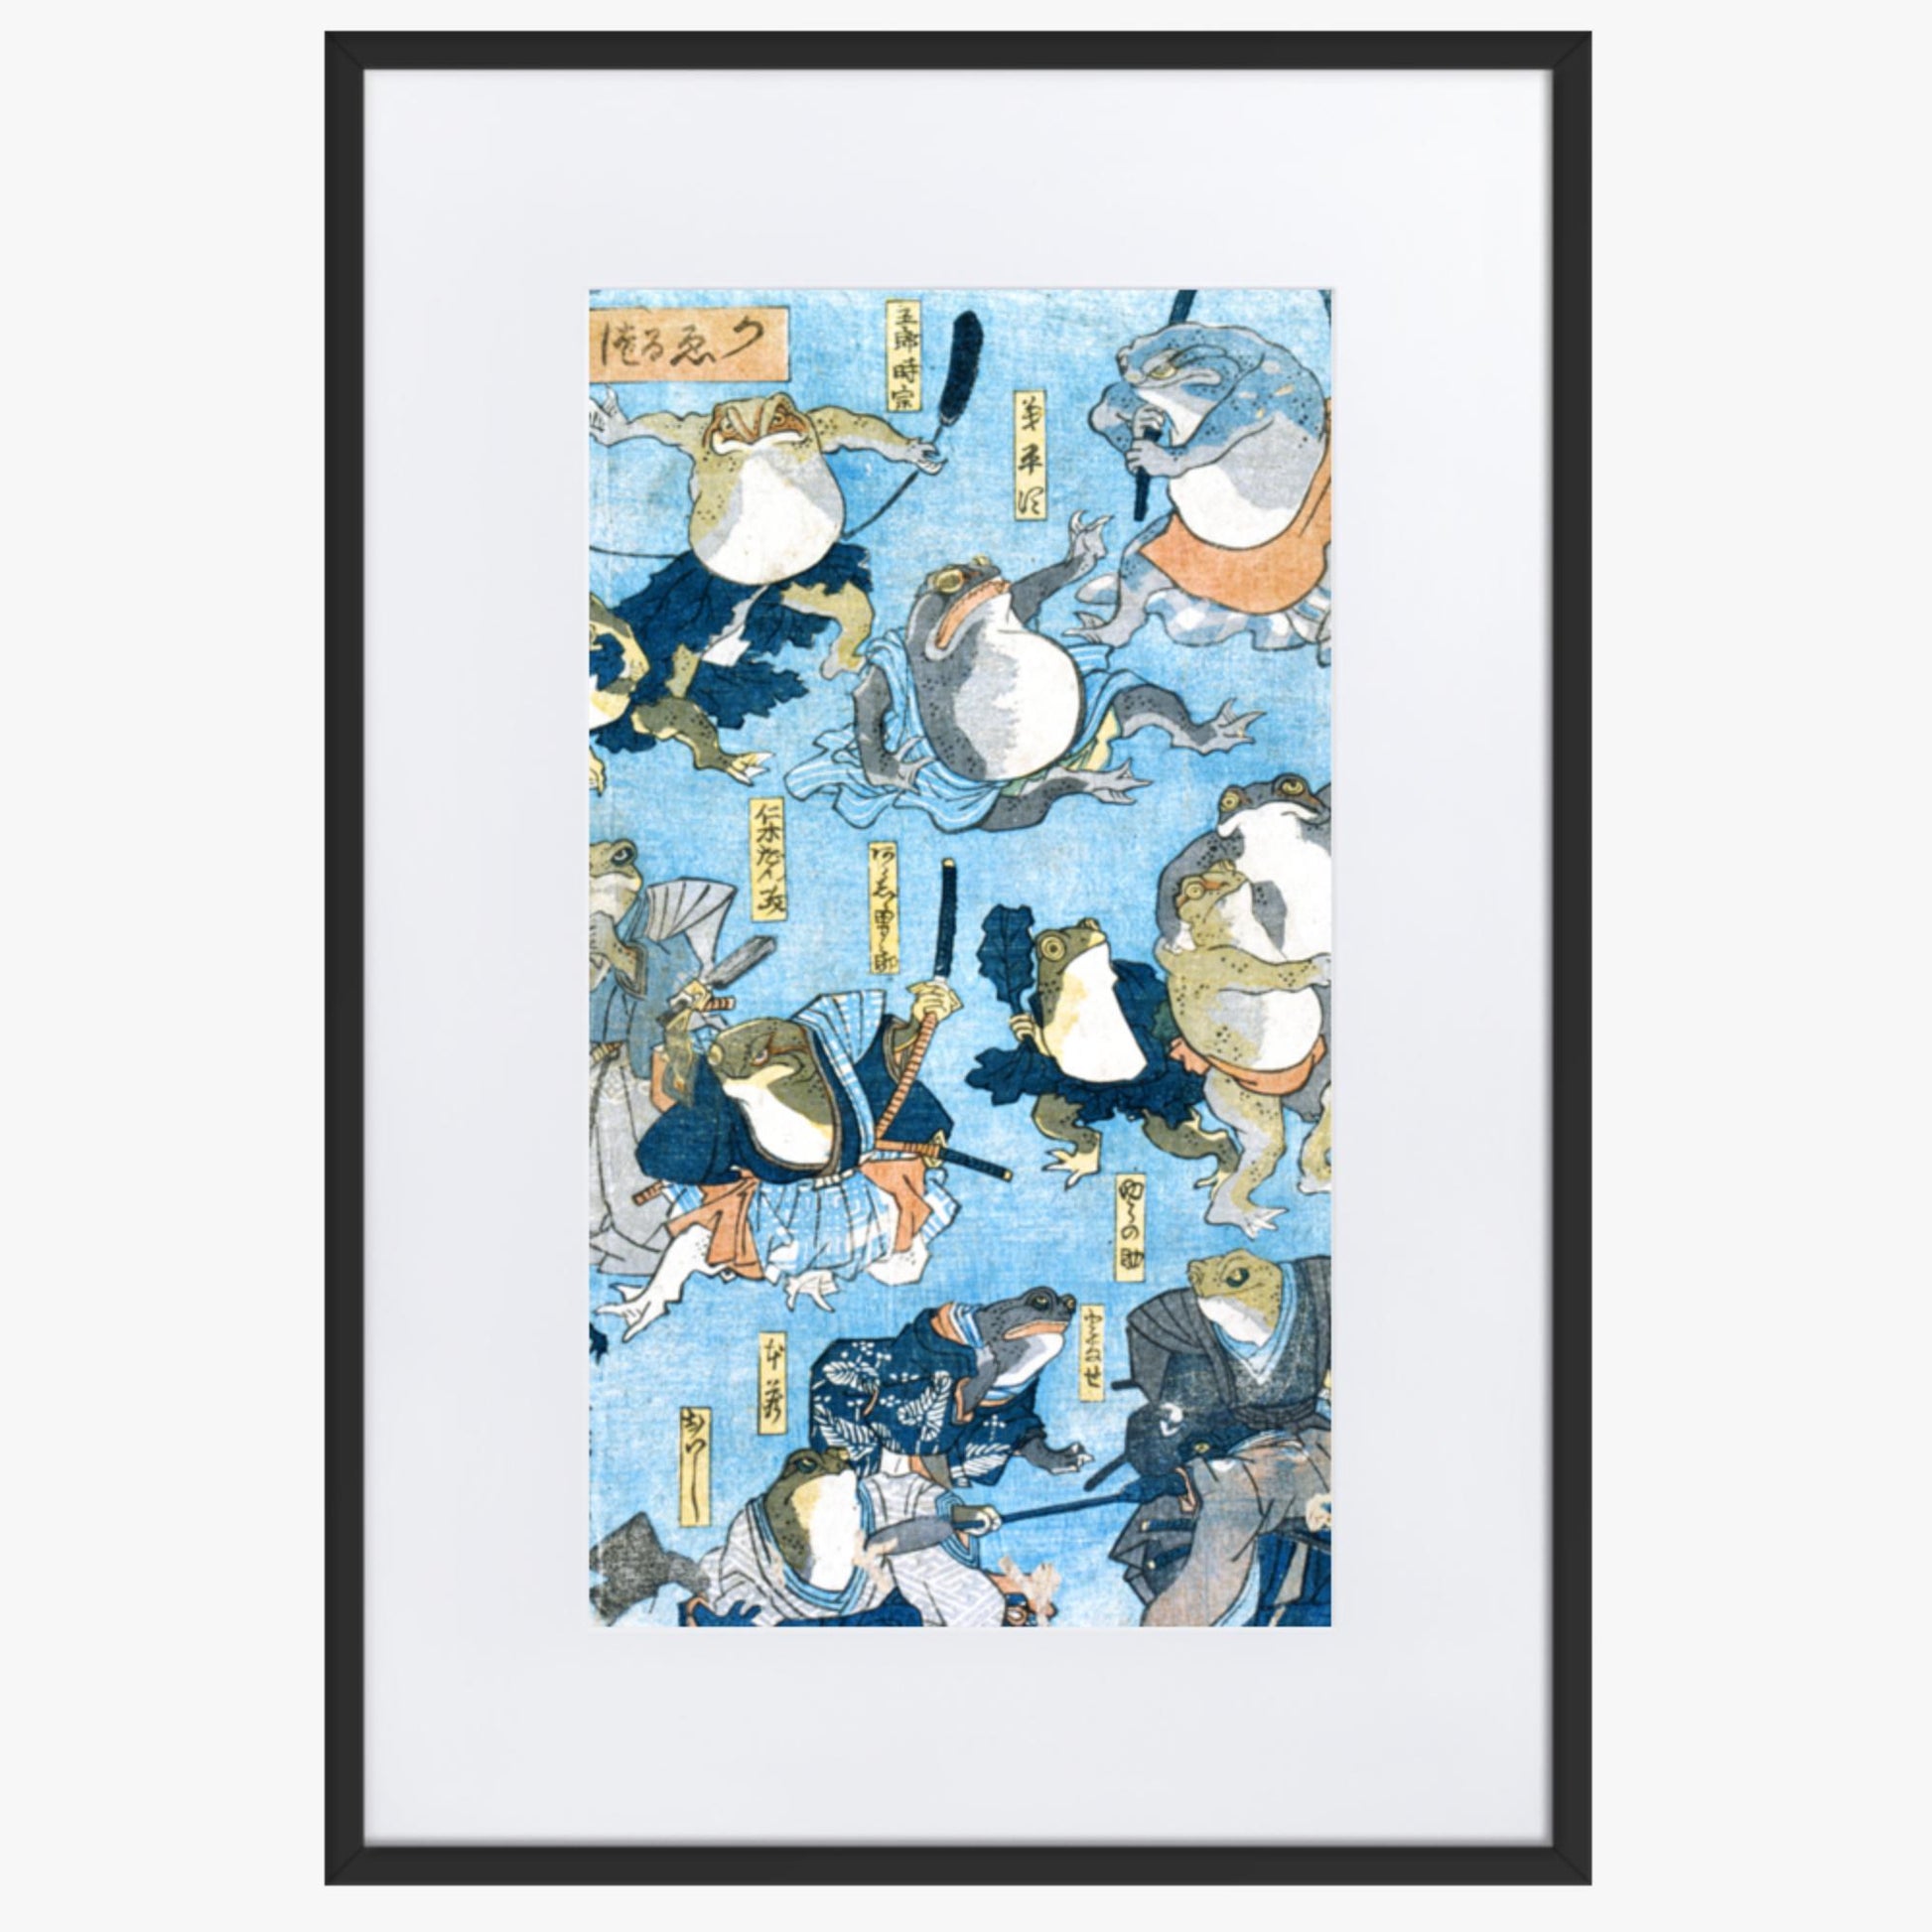 Utagawa Kuniyoshi - Famous Heroes of the Kabuki Stage Played by Frogs  61x91 cm Poster With Black Frame